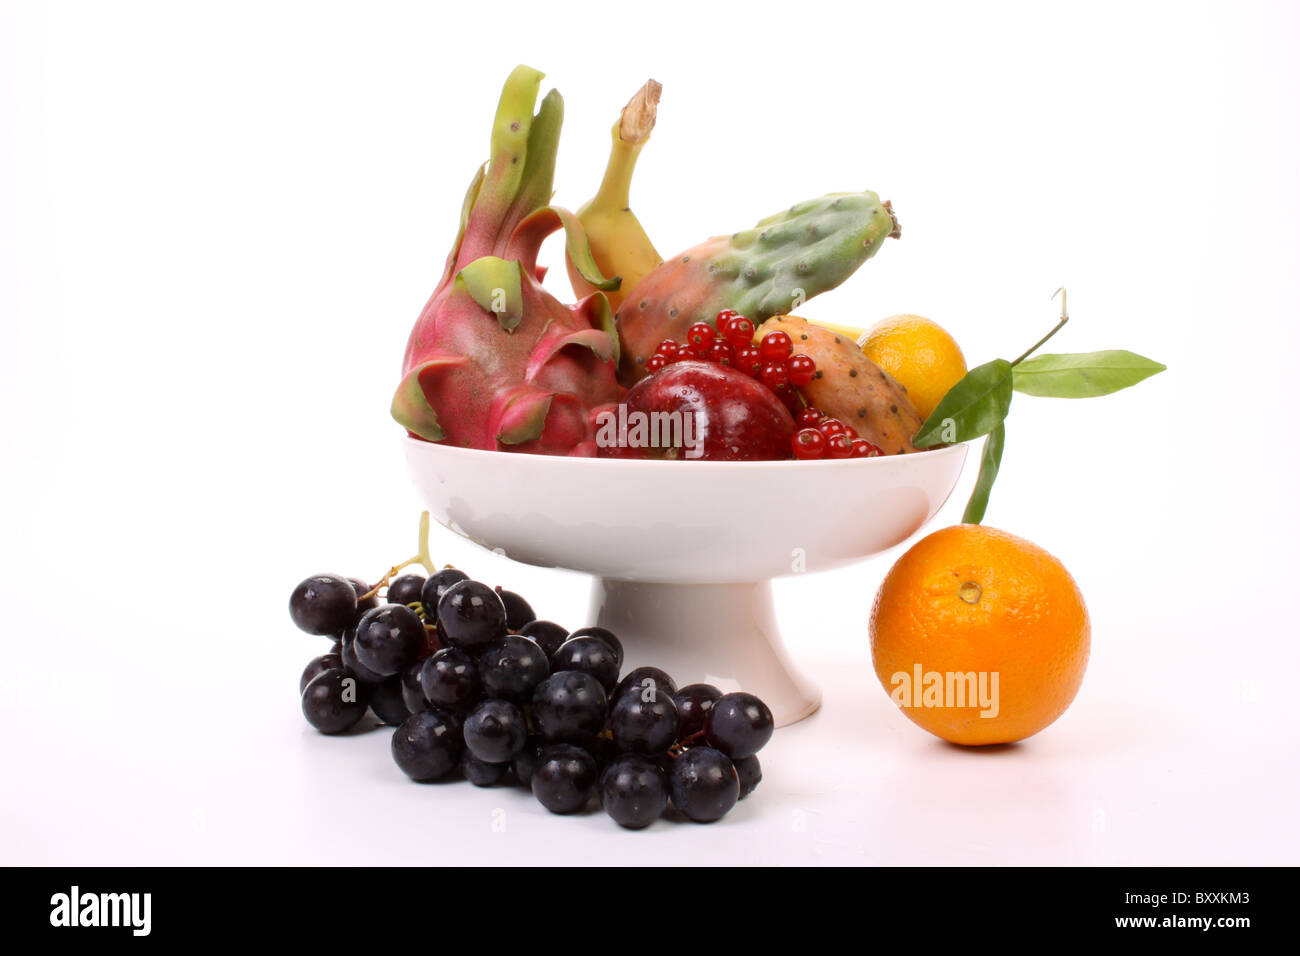 Composition of several fruits on a fruit-dish Stock Photo